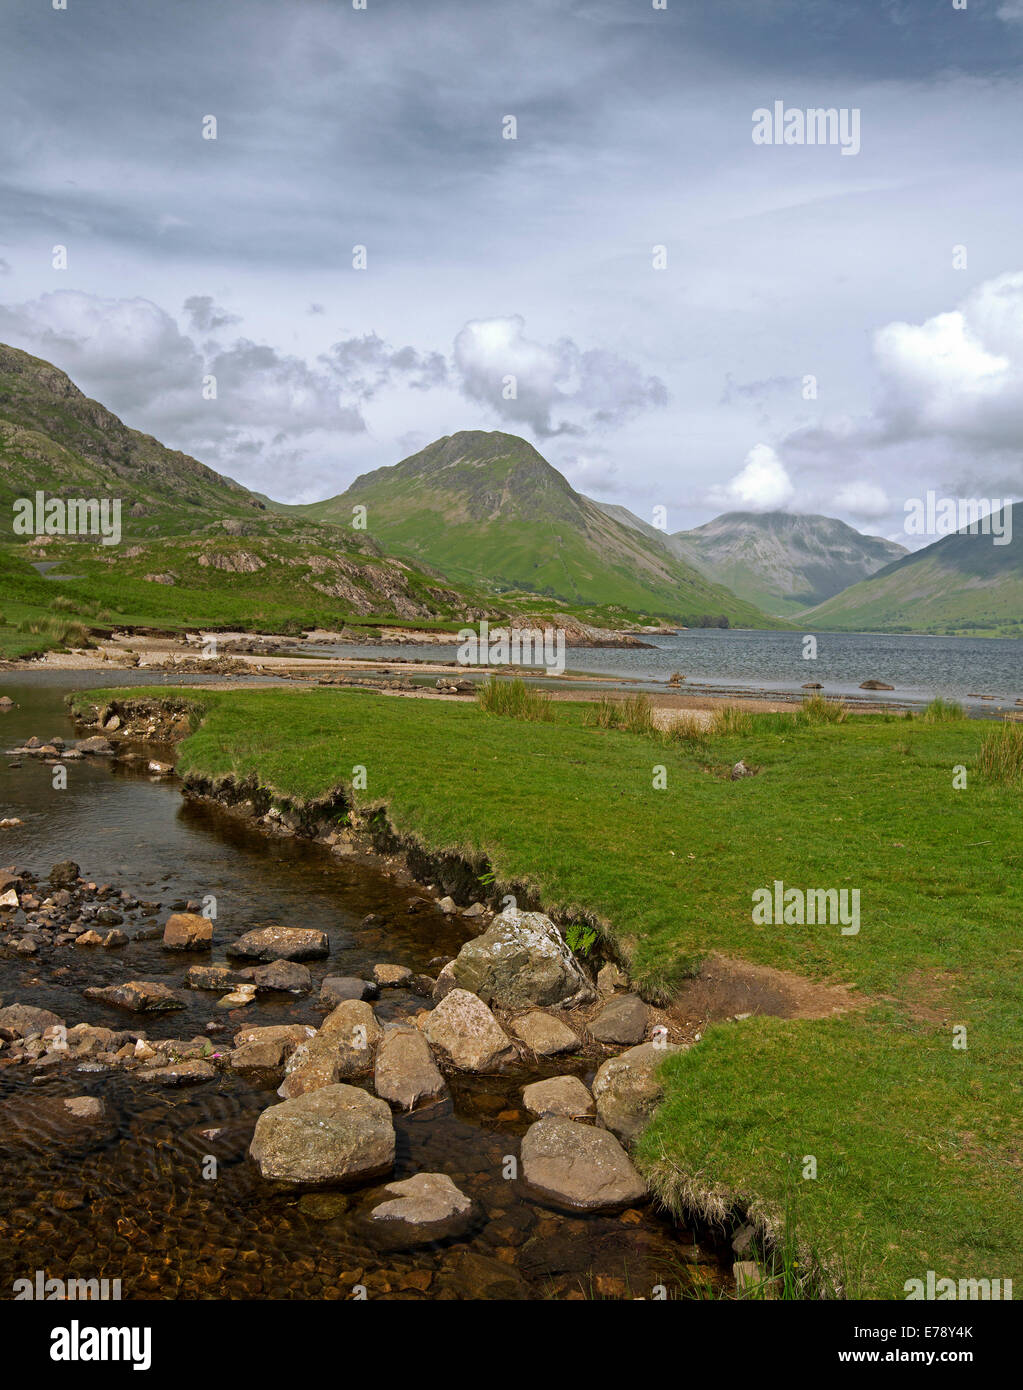 Wastwater lake surrounded by mountain peaks coated with green vegetation, draped with low cloud, Lake District, Cumbria, England Stock Photo